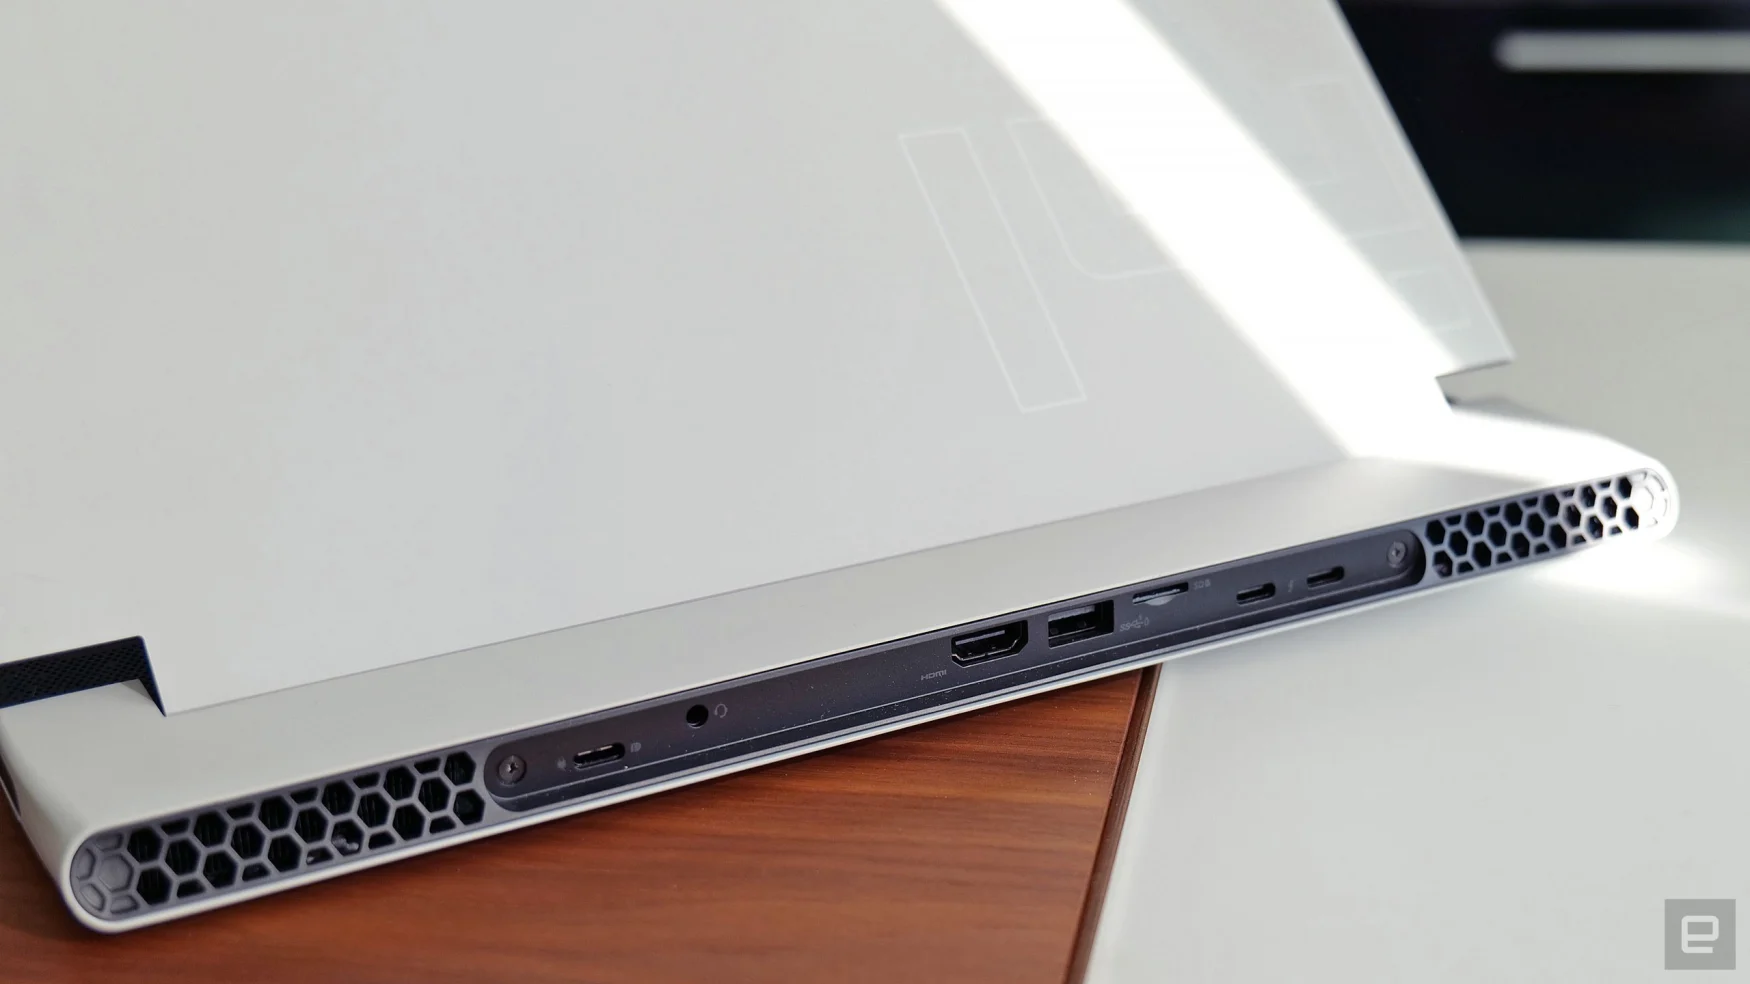 For a thin-and-light gaming notebook, the x14 has a solid selection of ports including three USB-C, HDMI 2.1, a combo headphone/mic jack, and even a microSD card slot. 